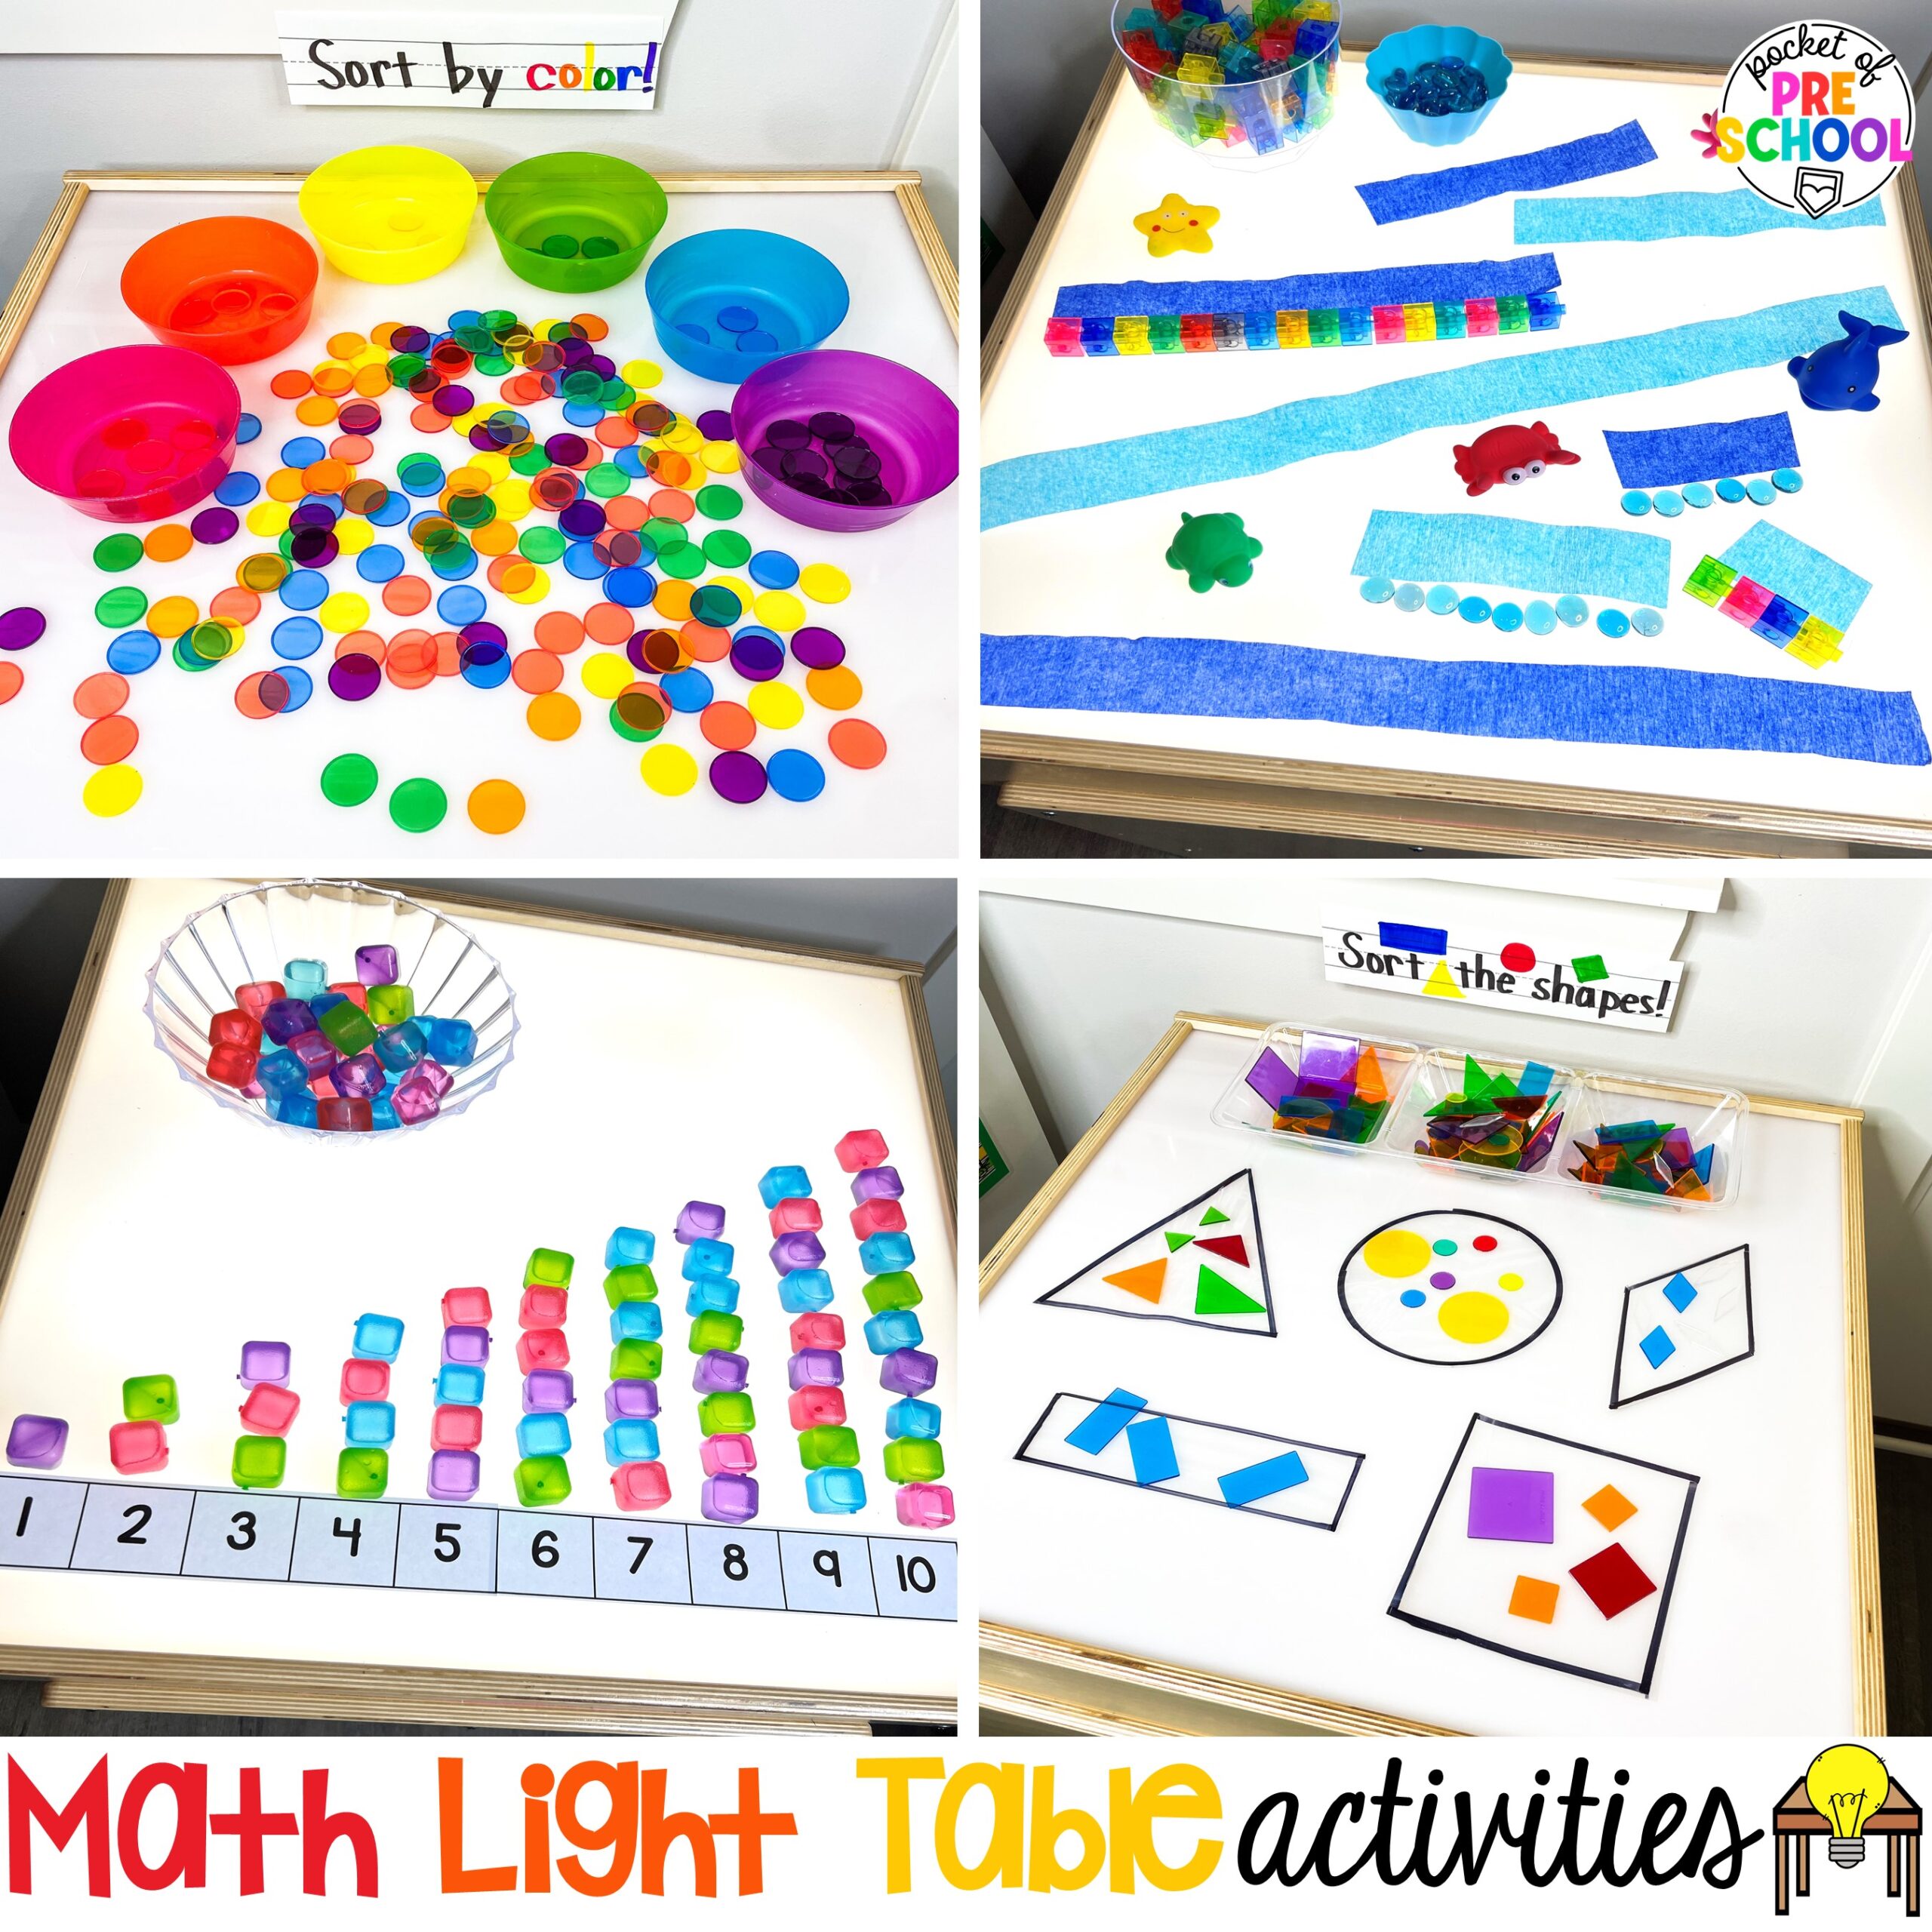 Math light table activities designed for preschool, pre-k, and kindergarten classrooms. Ideas for colors, shapes, counting, measurement, and more!